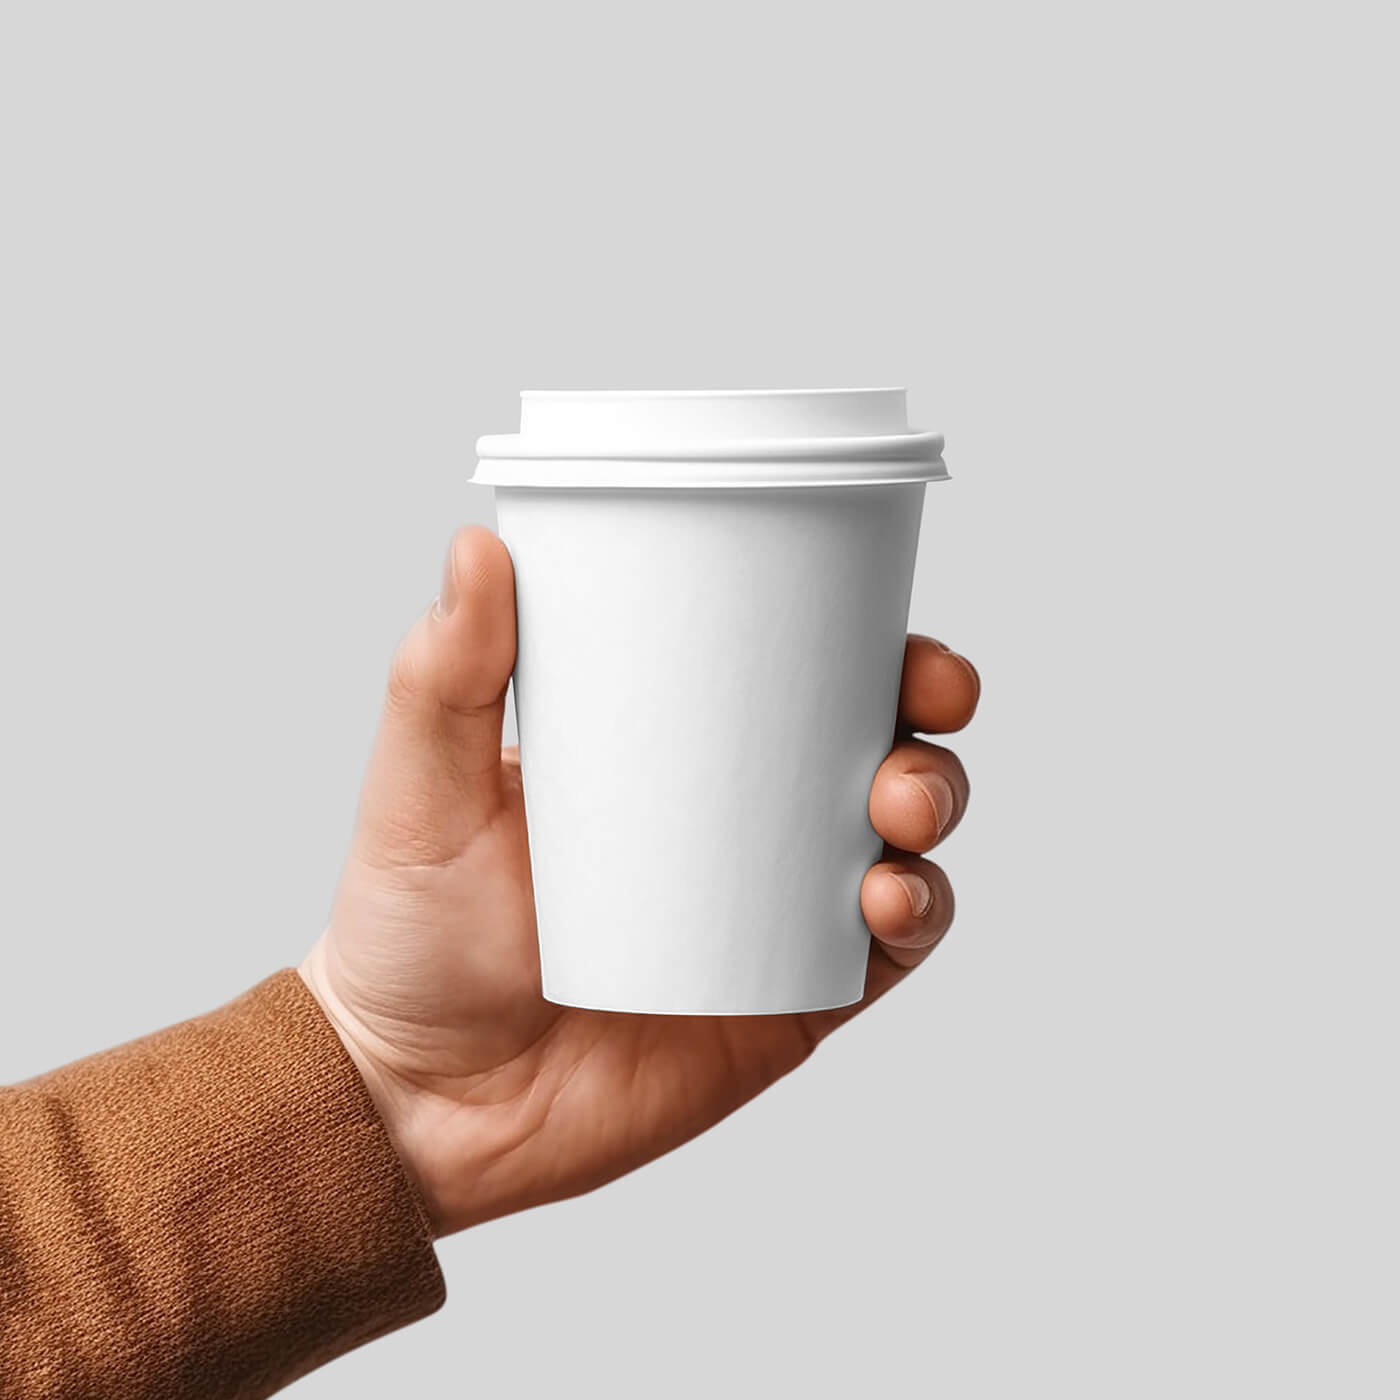 Free Medium Paper Cup in Hand Mockup2